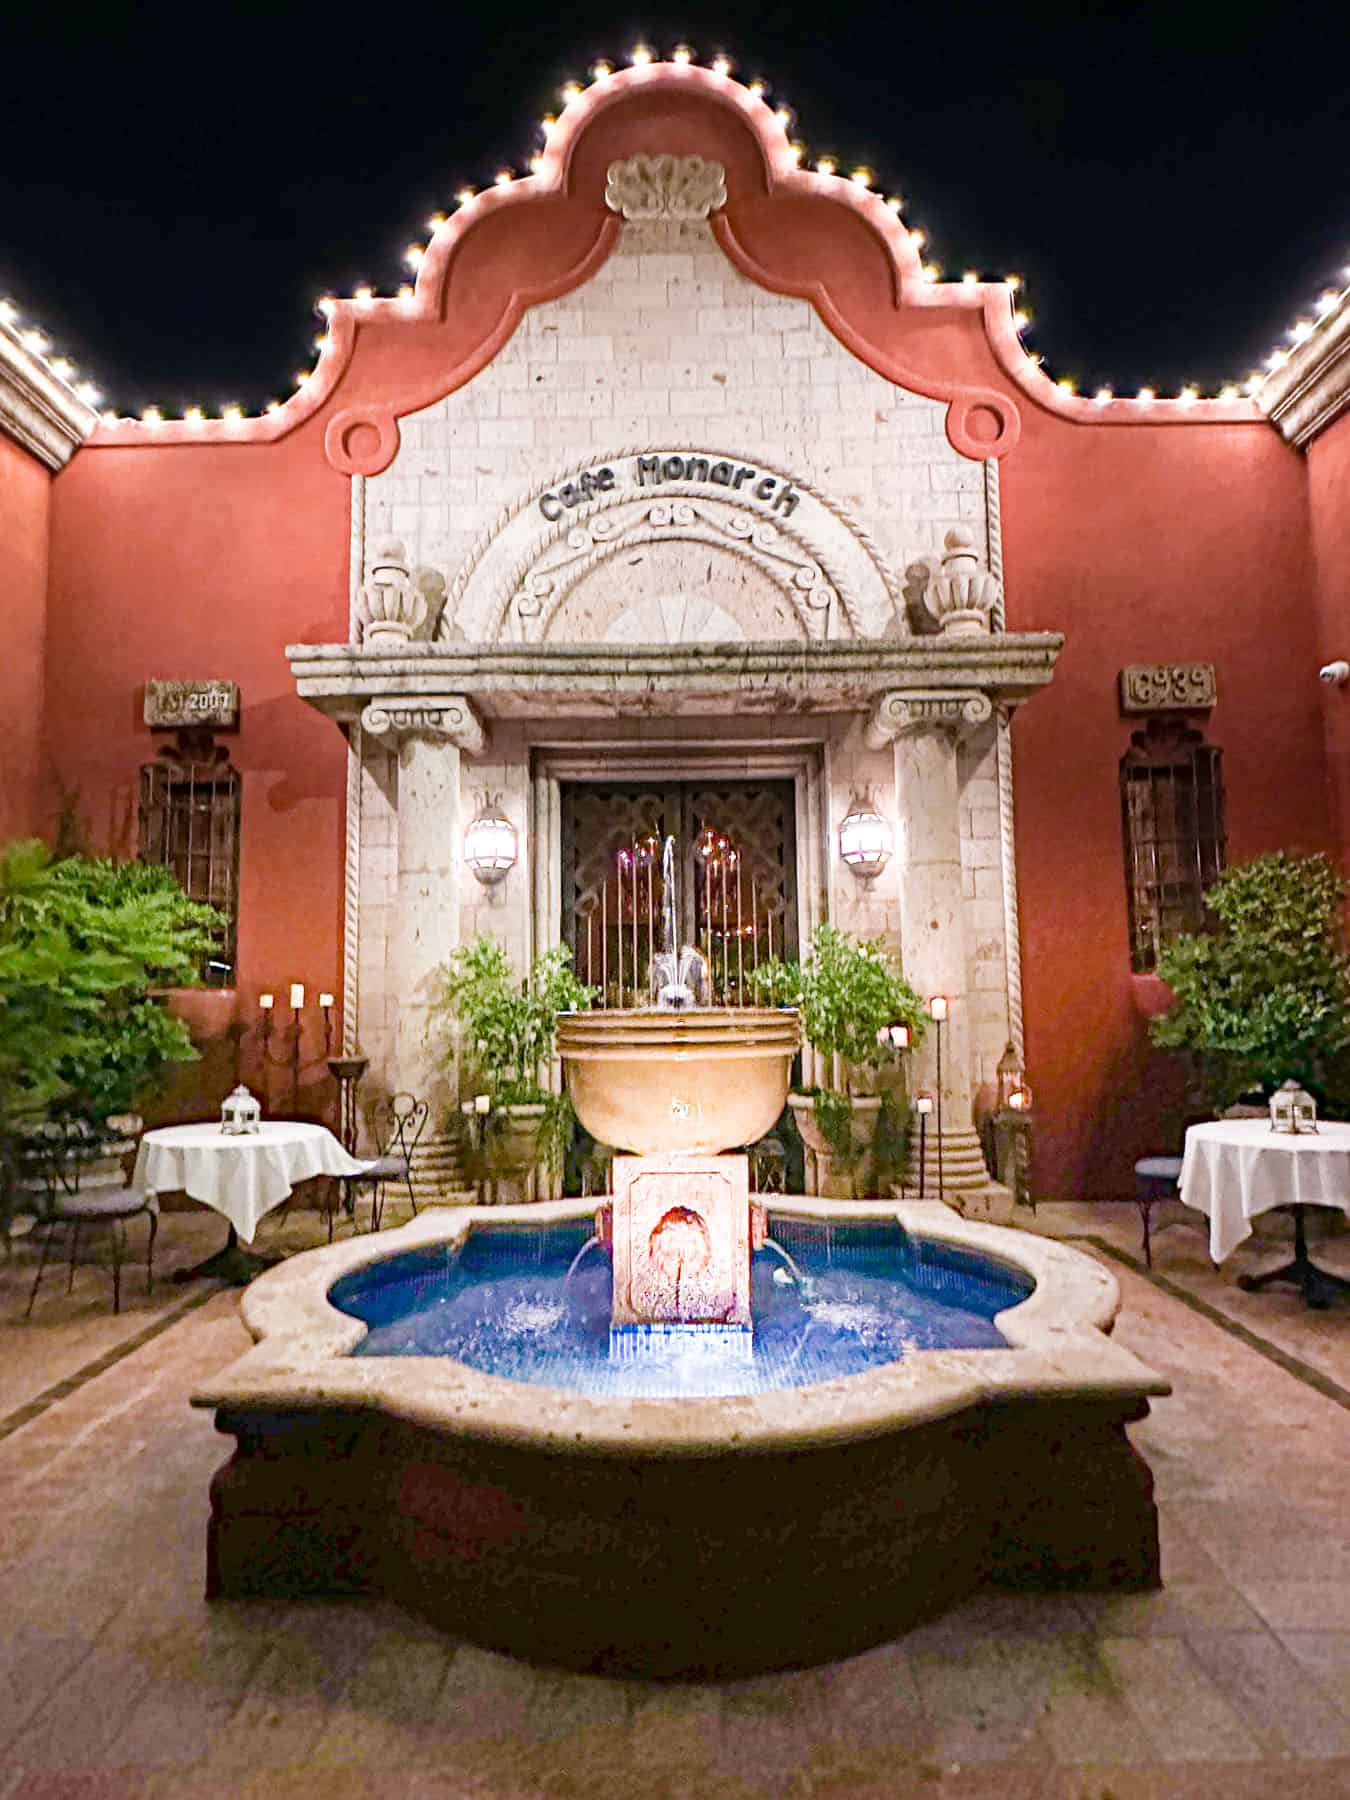 the view of the Cafe Monarch Restaurant building from outside, with the fountain in the front, at night.